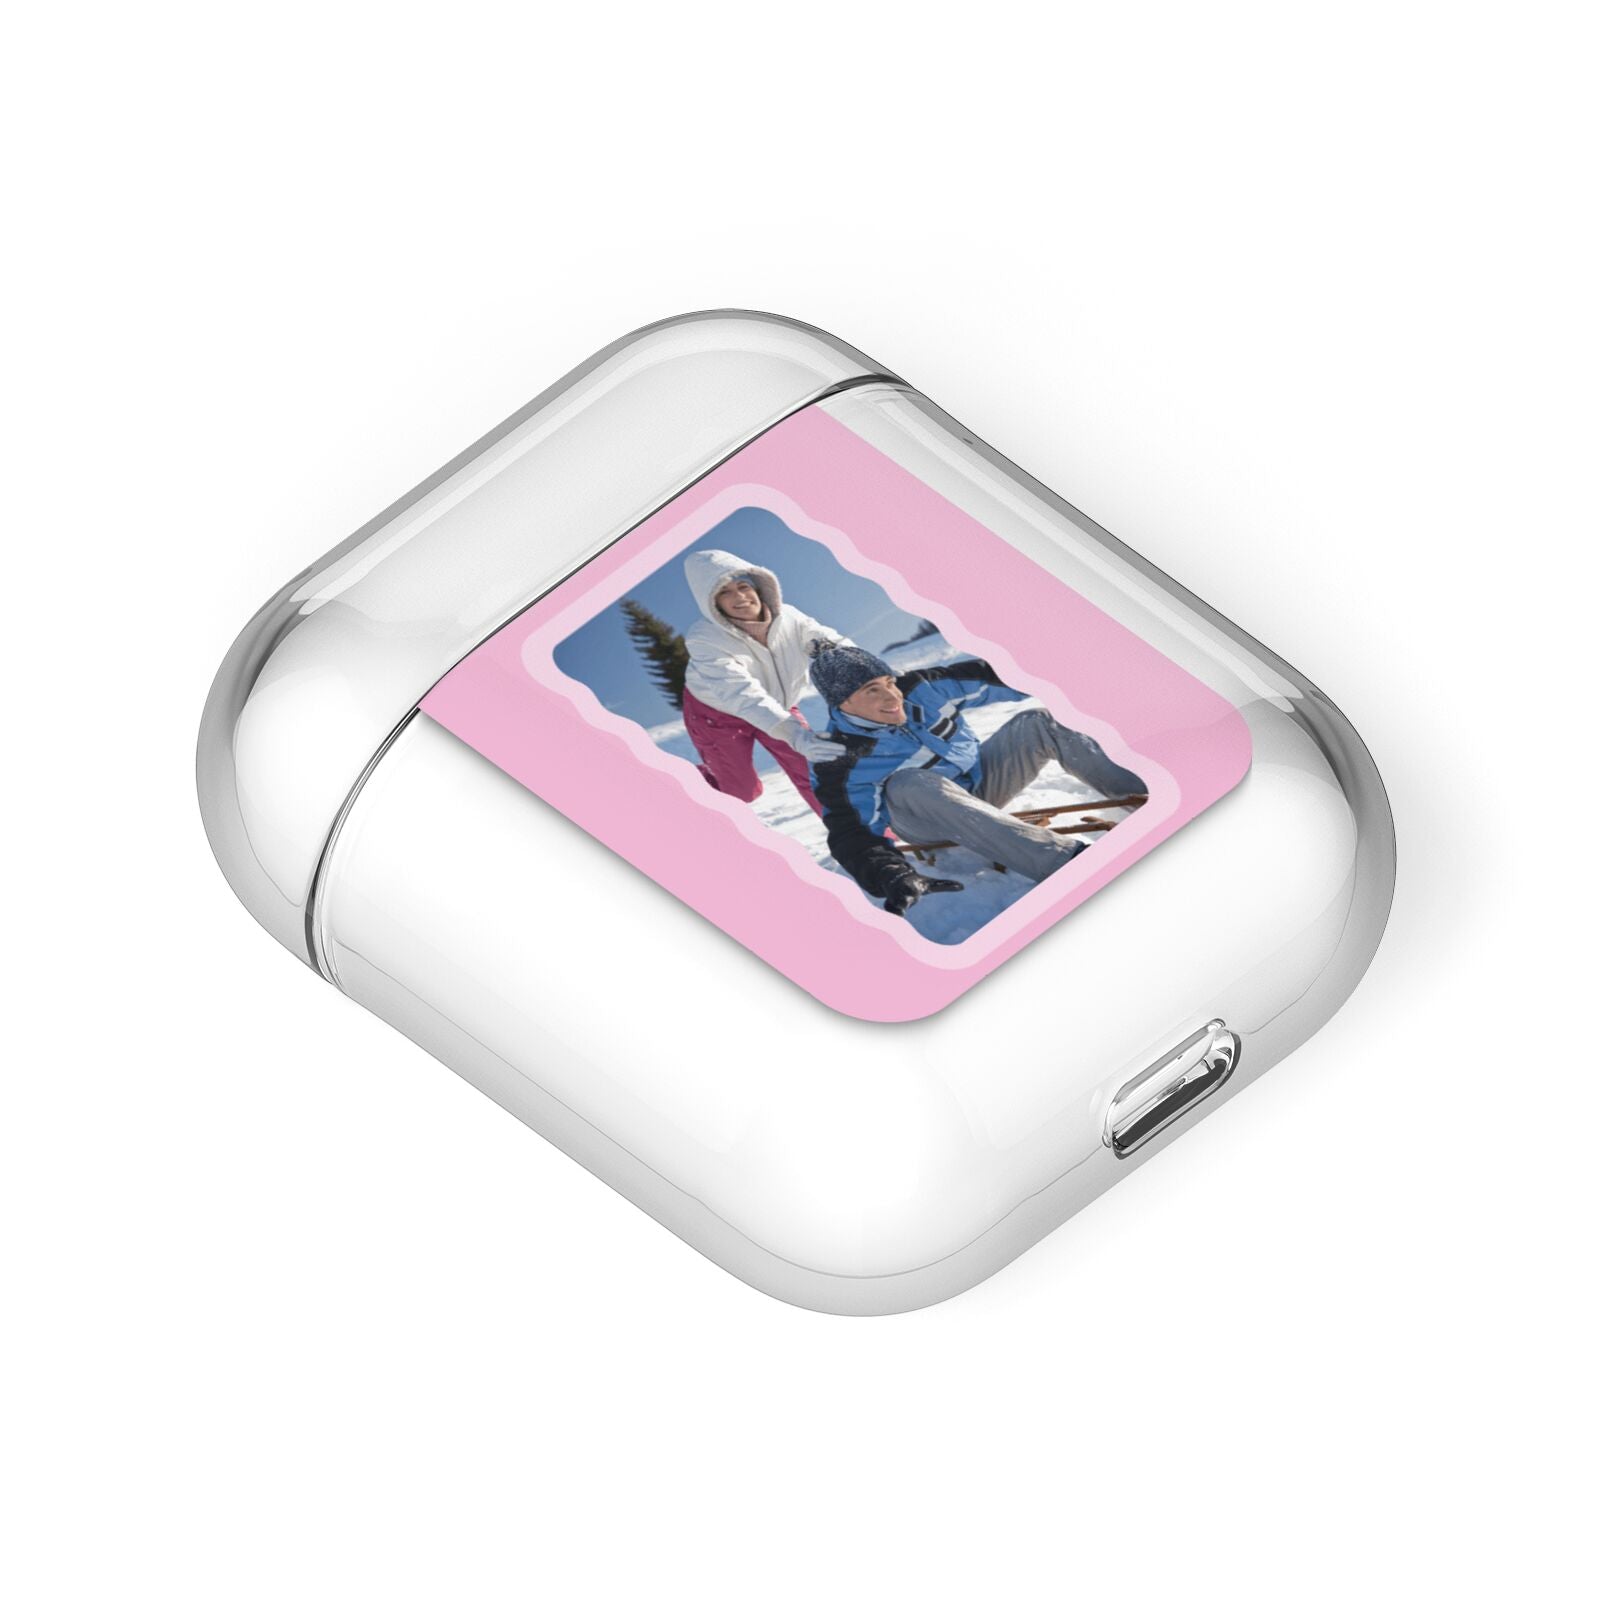 Wavy Photo Border AirPods Case Laid Flat